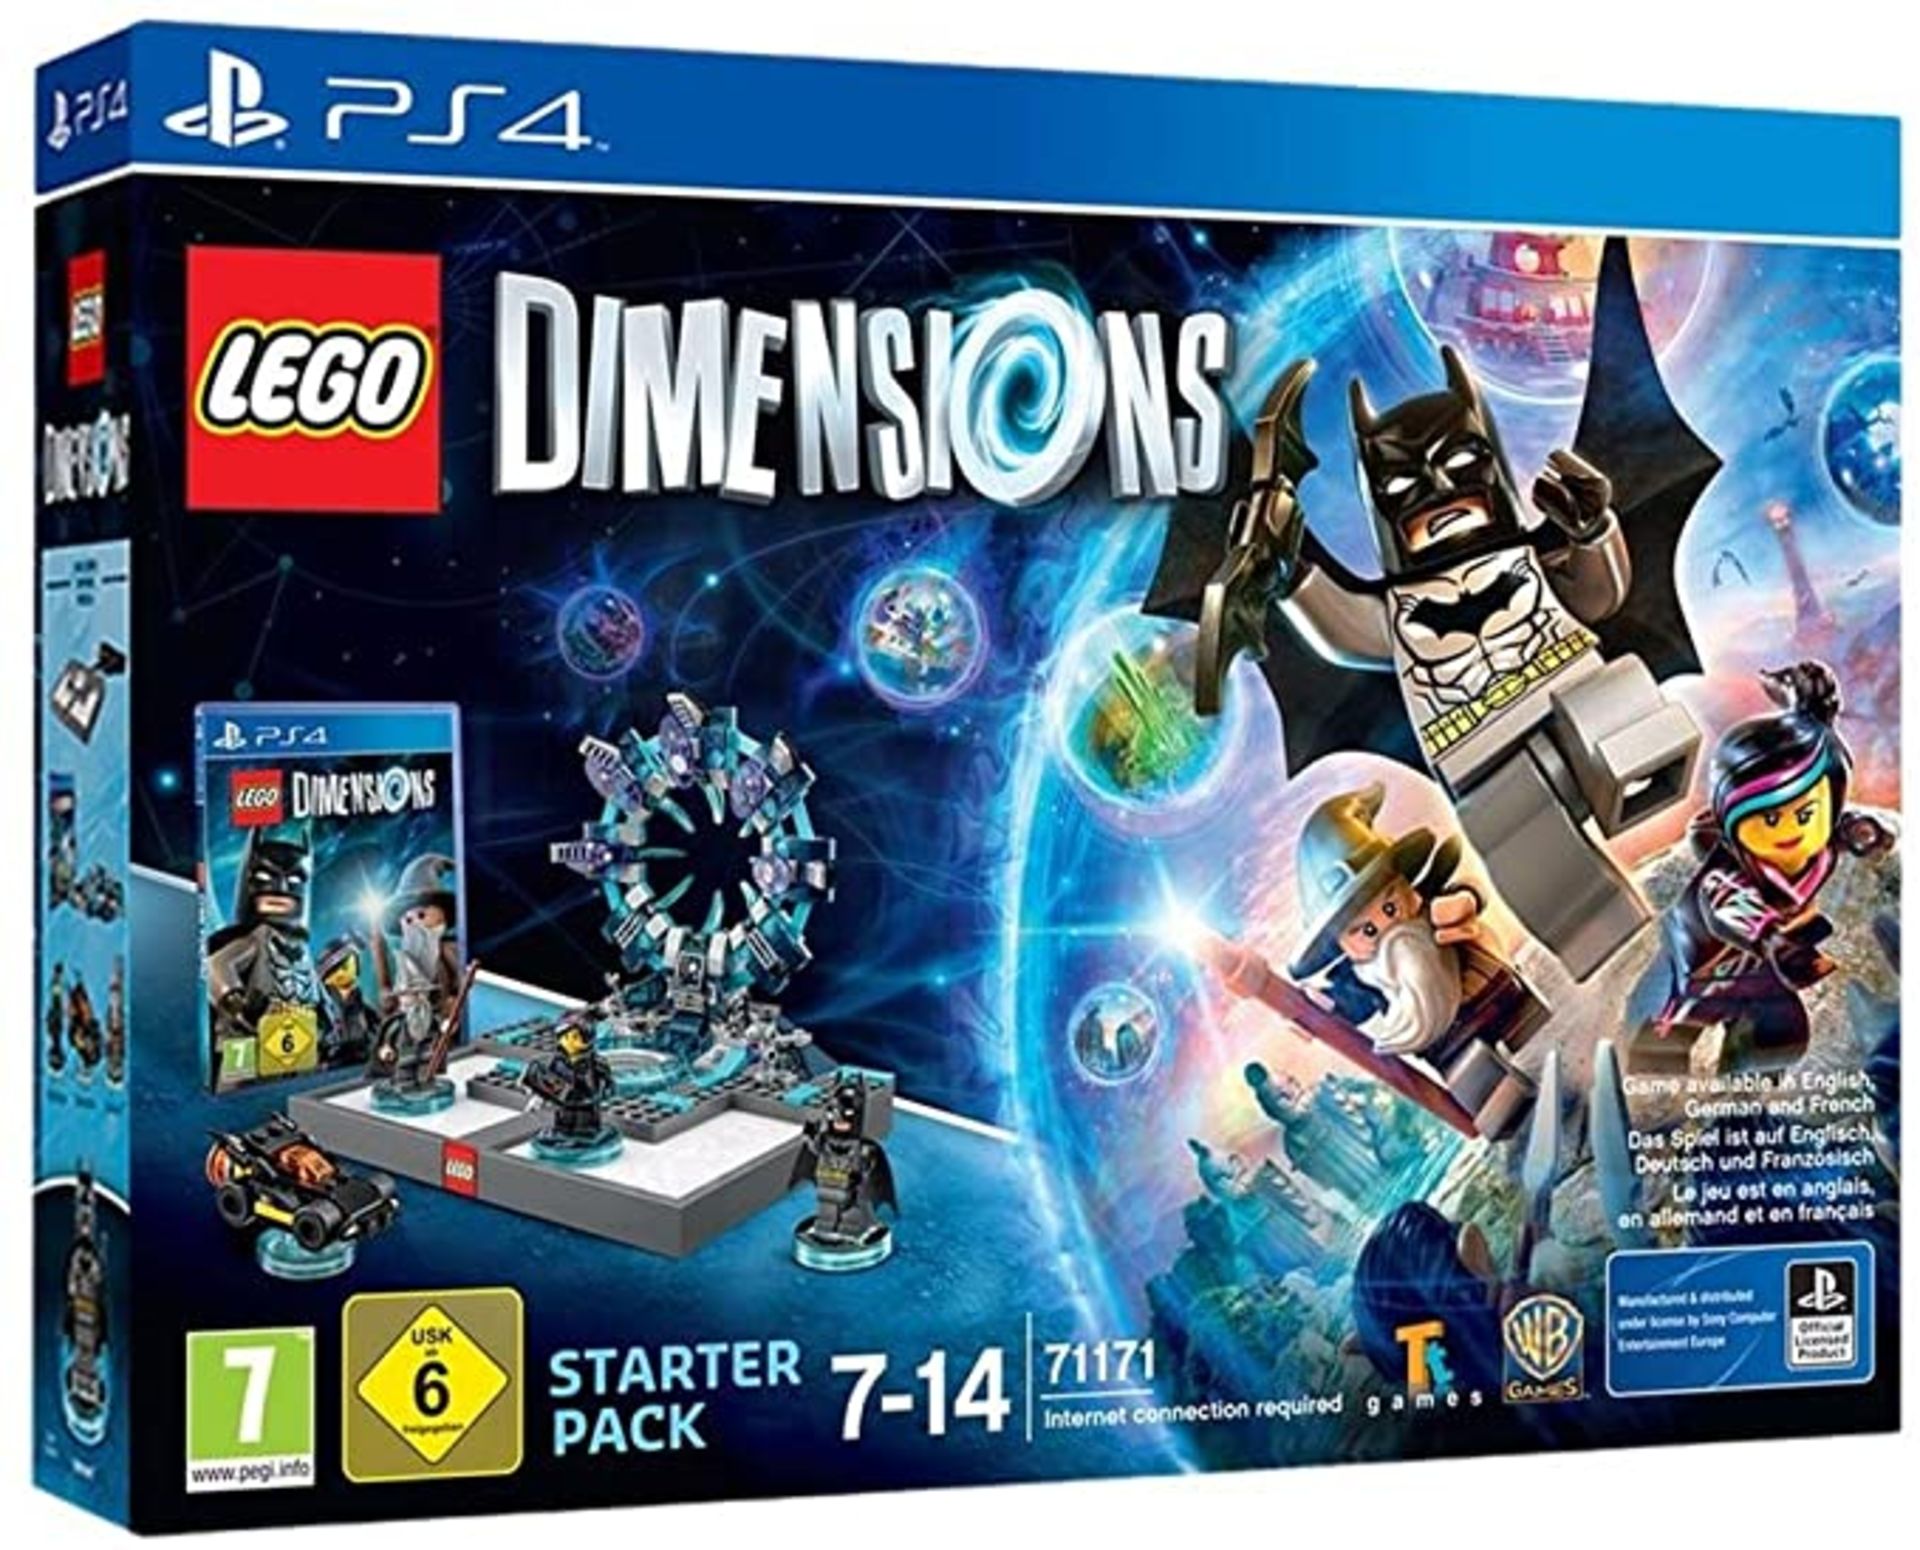 (R14B) 1x PS4 Lego Dimensions Starter Pack (71171). New, Sealed Item – Currently £133 Amazon. Sligh